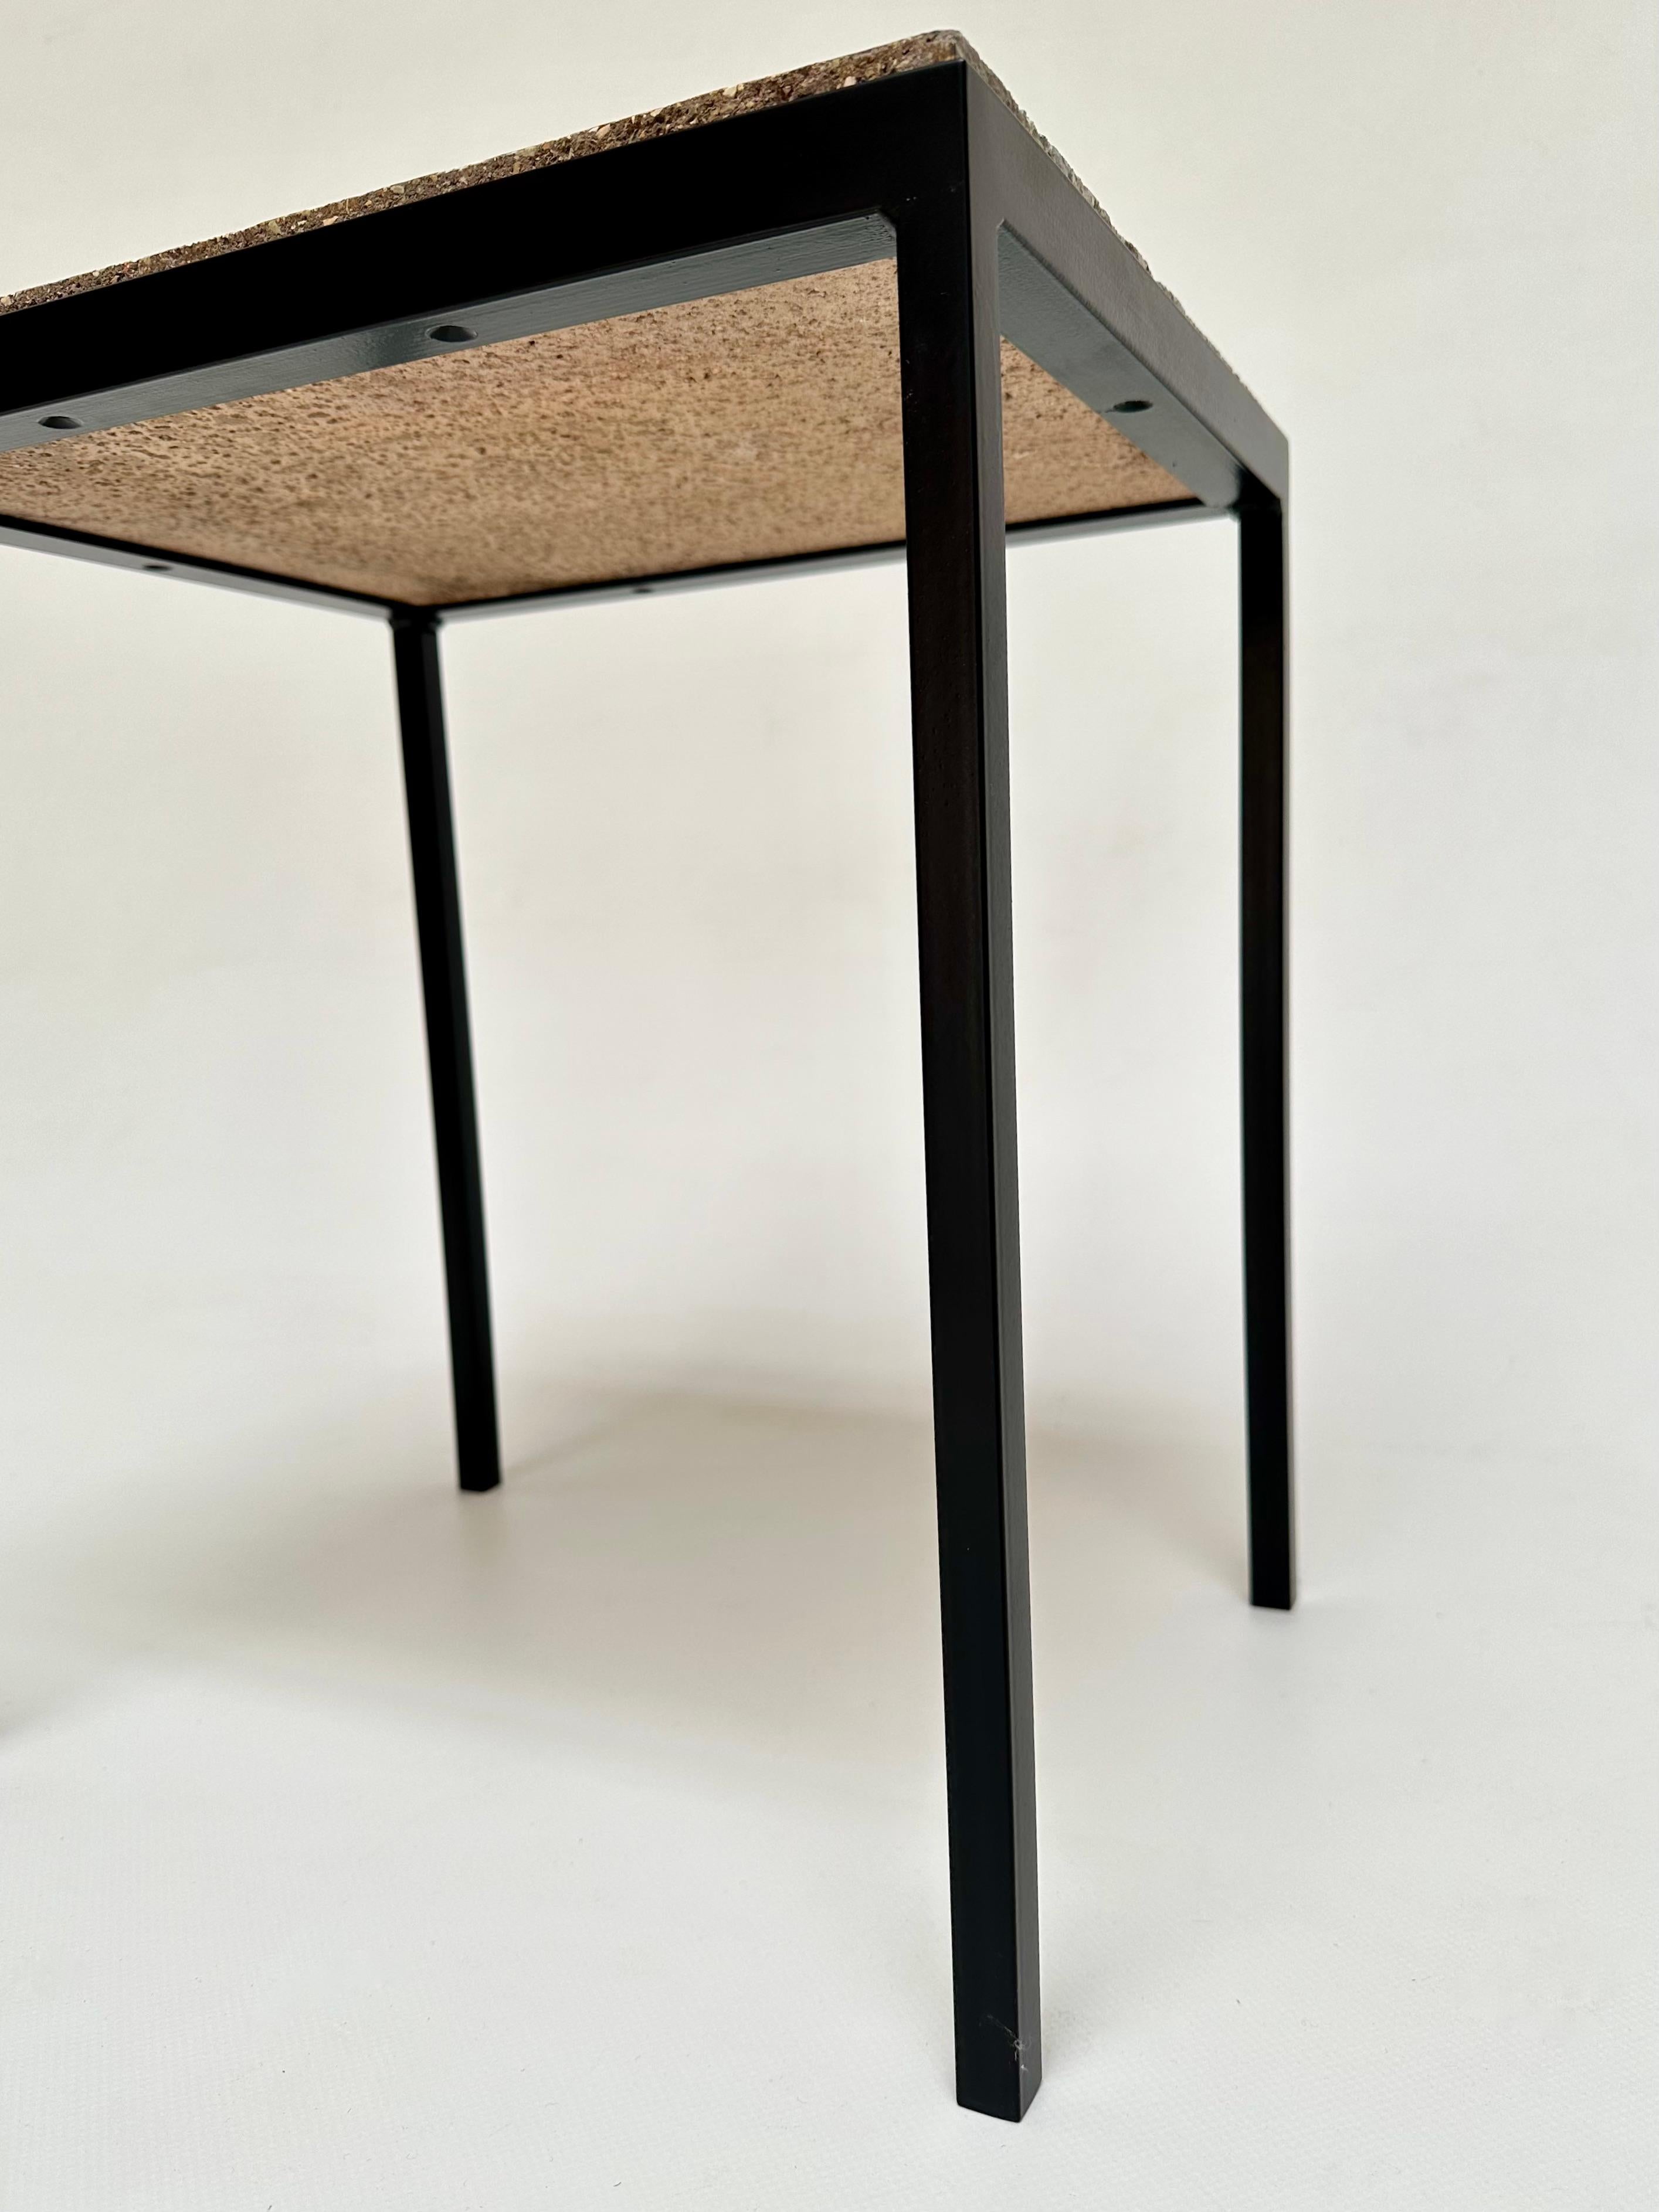 Decorative Low Table, Jo Amado, France 1962 For Sale 5